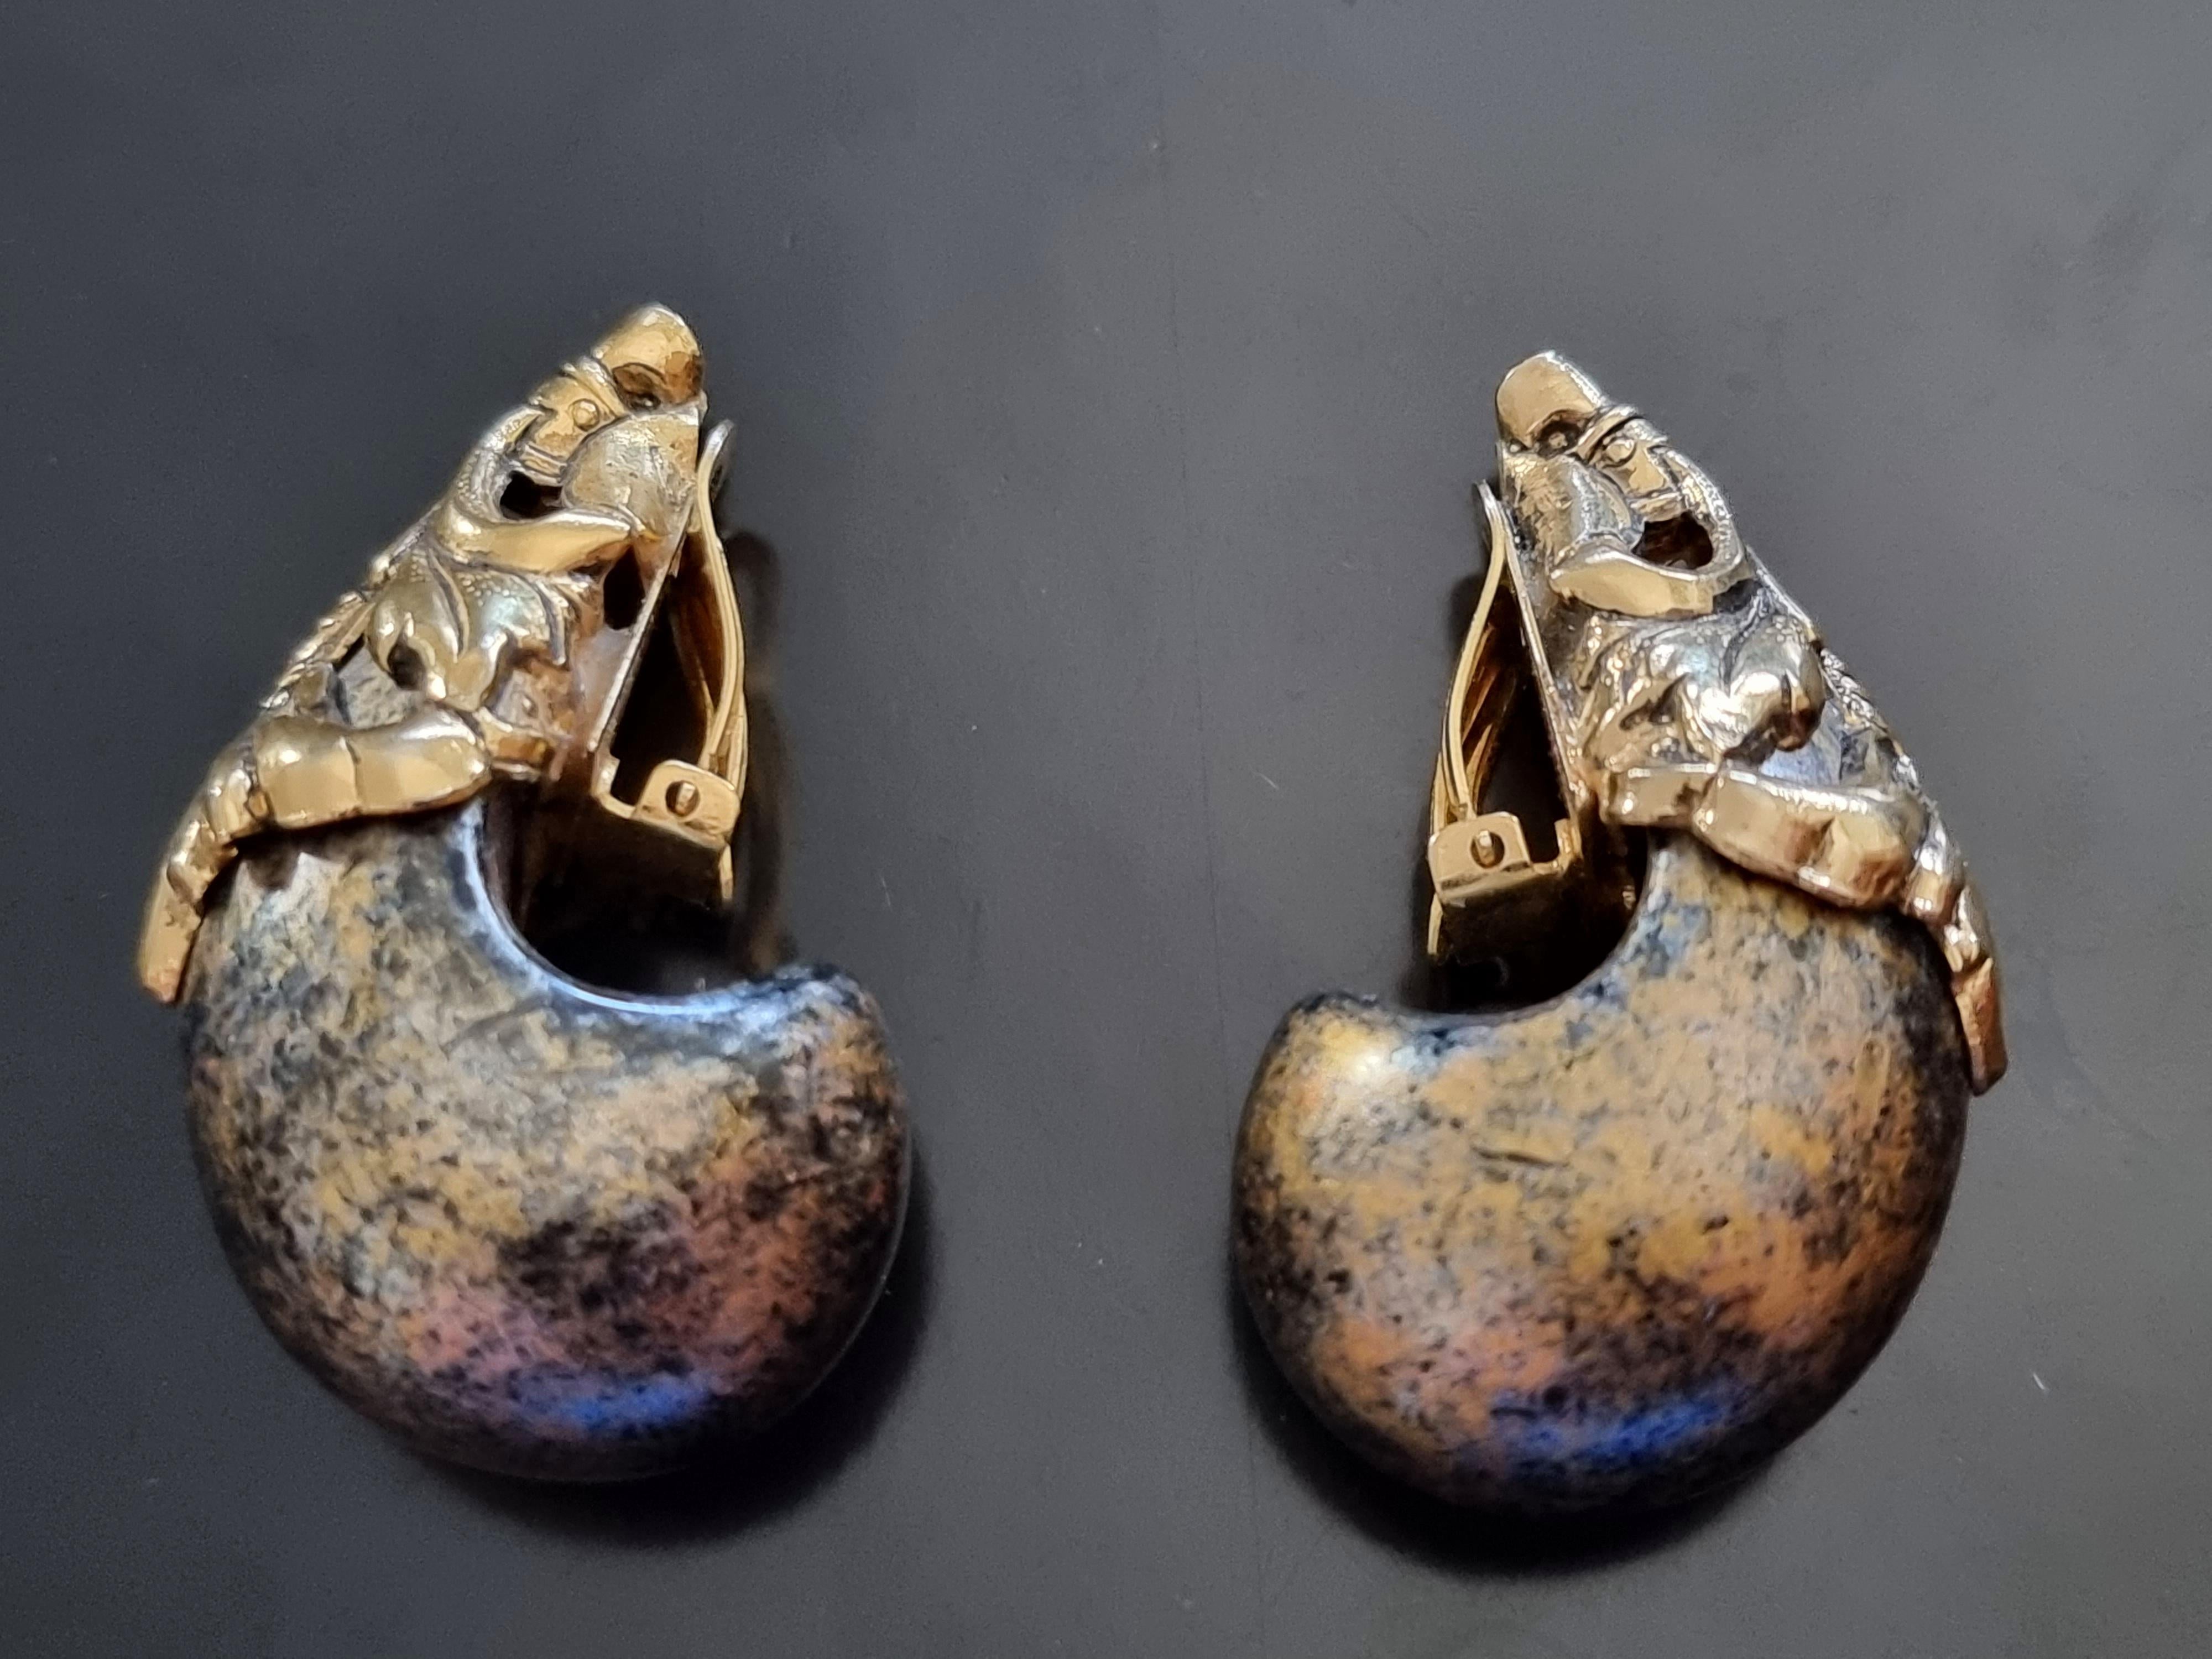 Large Clip-on Earrings,
80s vintage,
by high-end French designer Isabel Canovas,
very good quality,
size 5 x 3 cm, weight 1 x 18 g,
very good state.

Isabel CANOVAS was born in 1945 in Paris.
Isabel was exposed to Haute Couture from an early age.